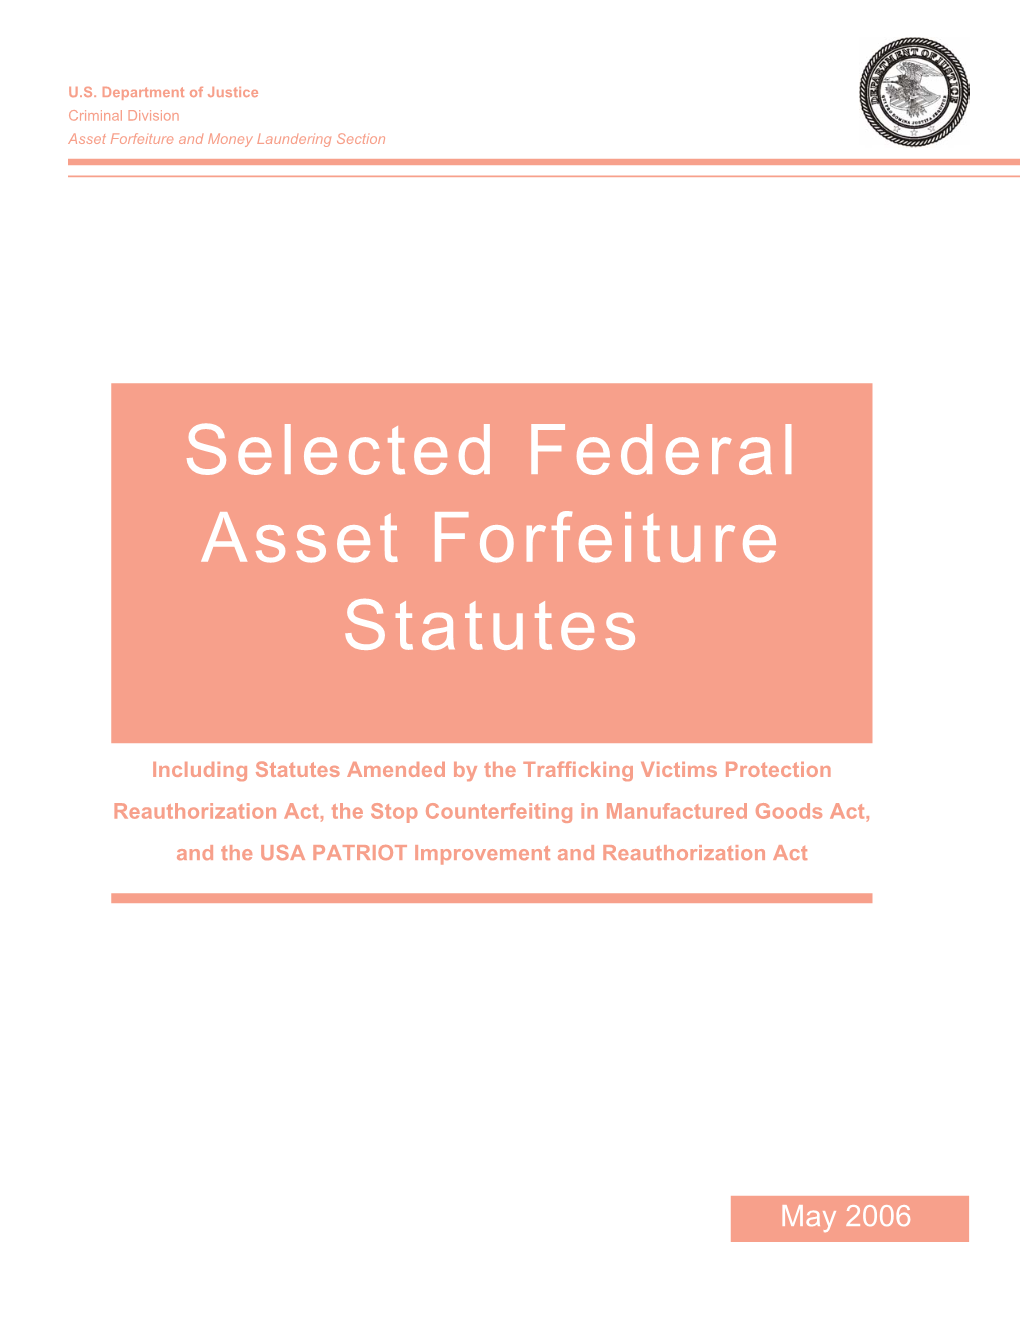 Selected Federal Asset Forfeiture Statutes